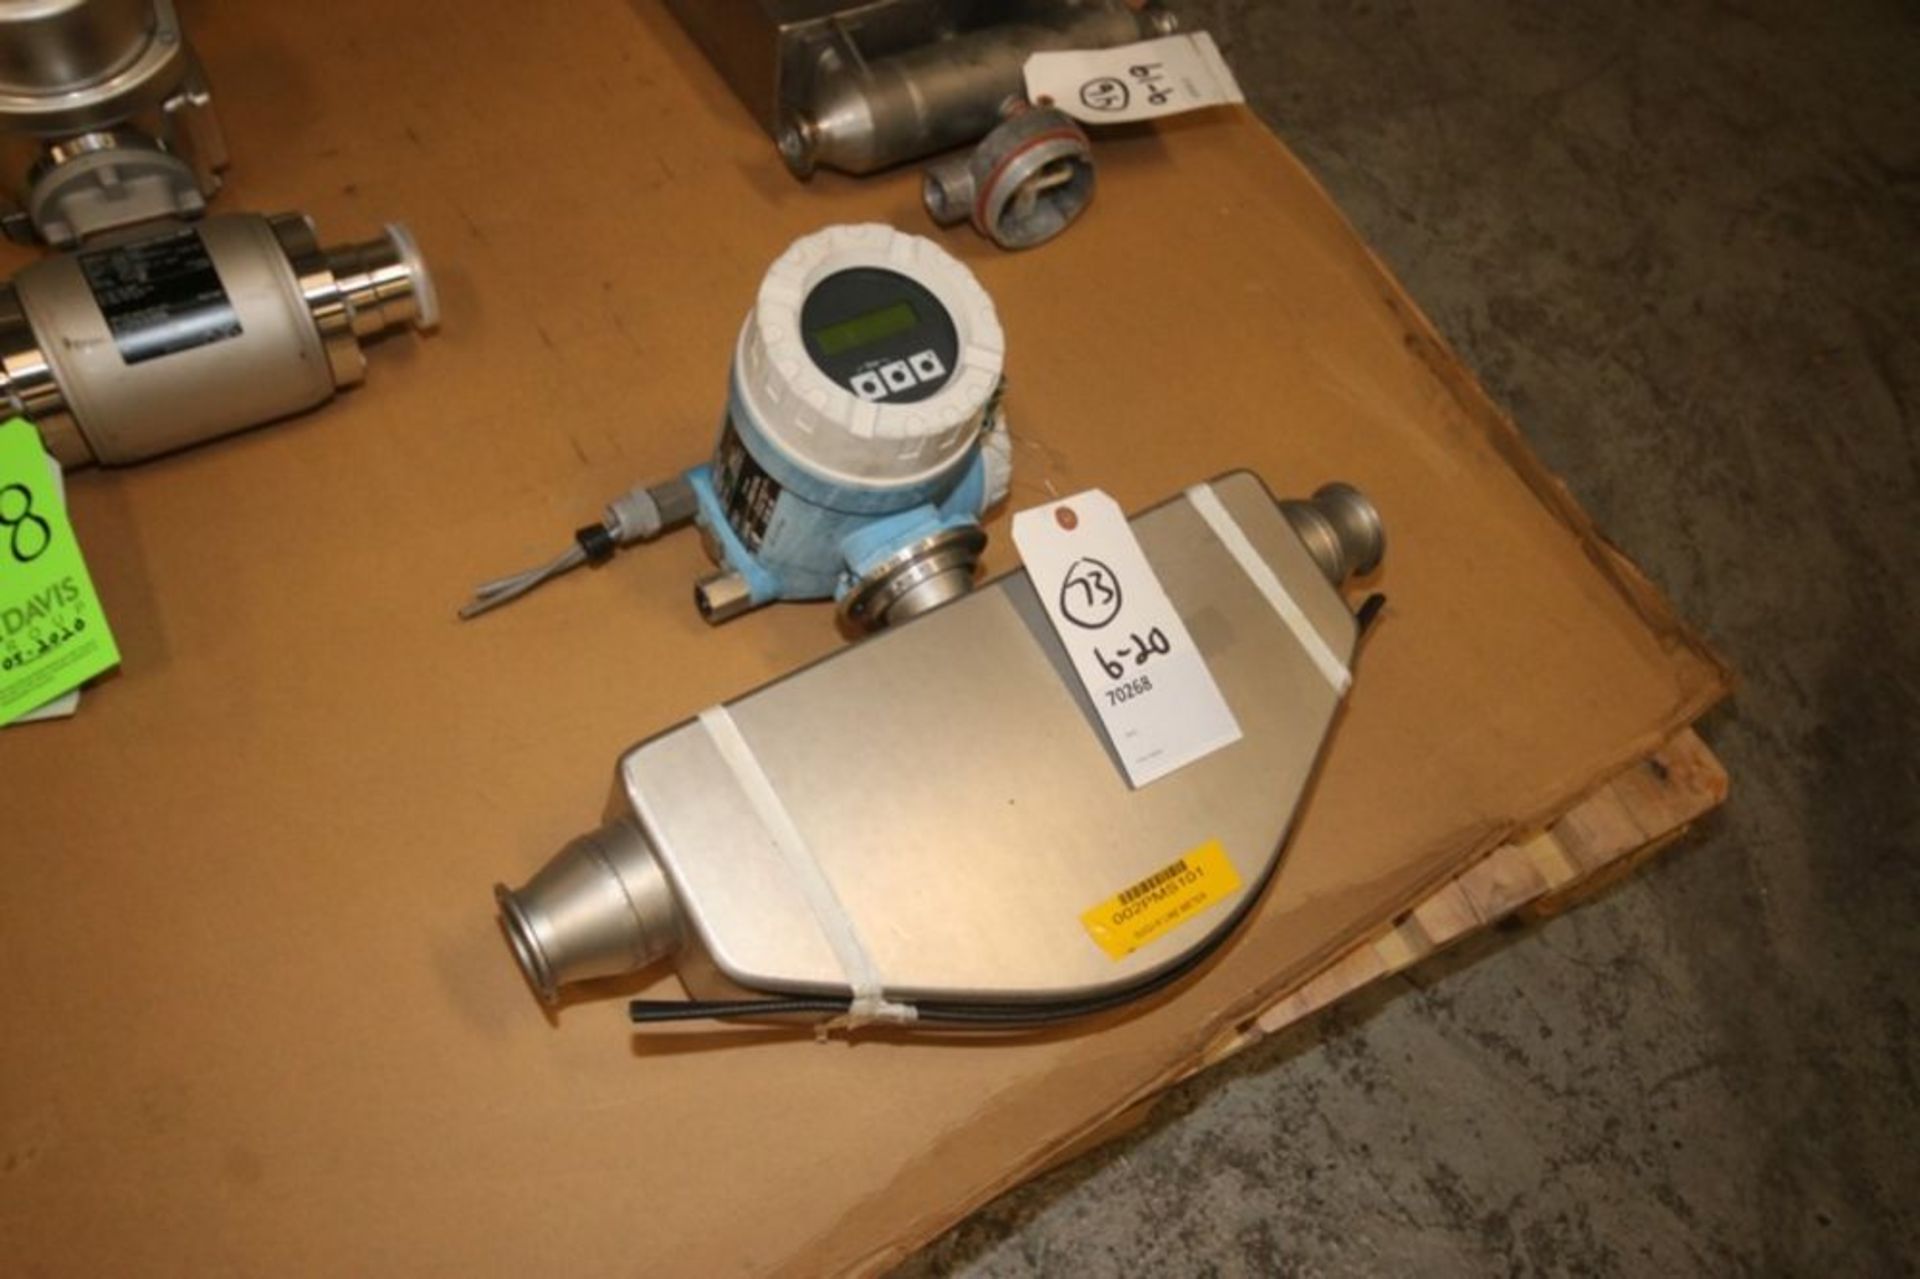 Endress+Hauser Flow Meter, M/N PROMASS 80, Order Code: 80E50-AFTSAARABBA8, with Aprox. 2" Clamp Type